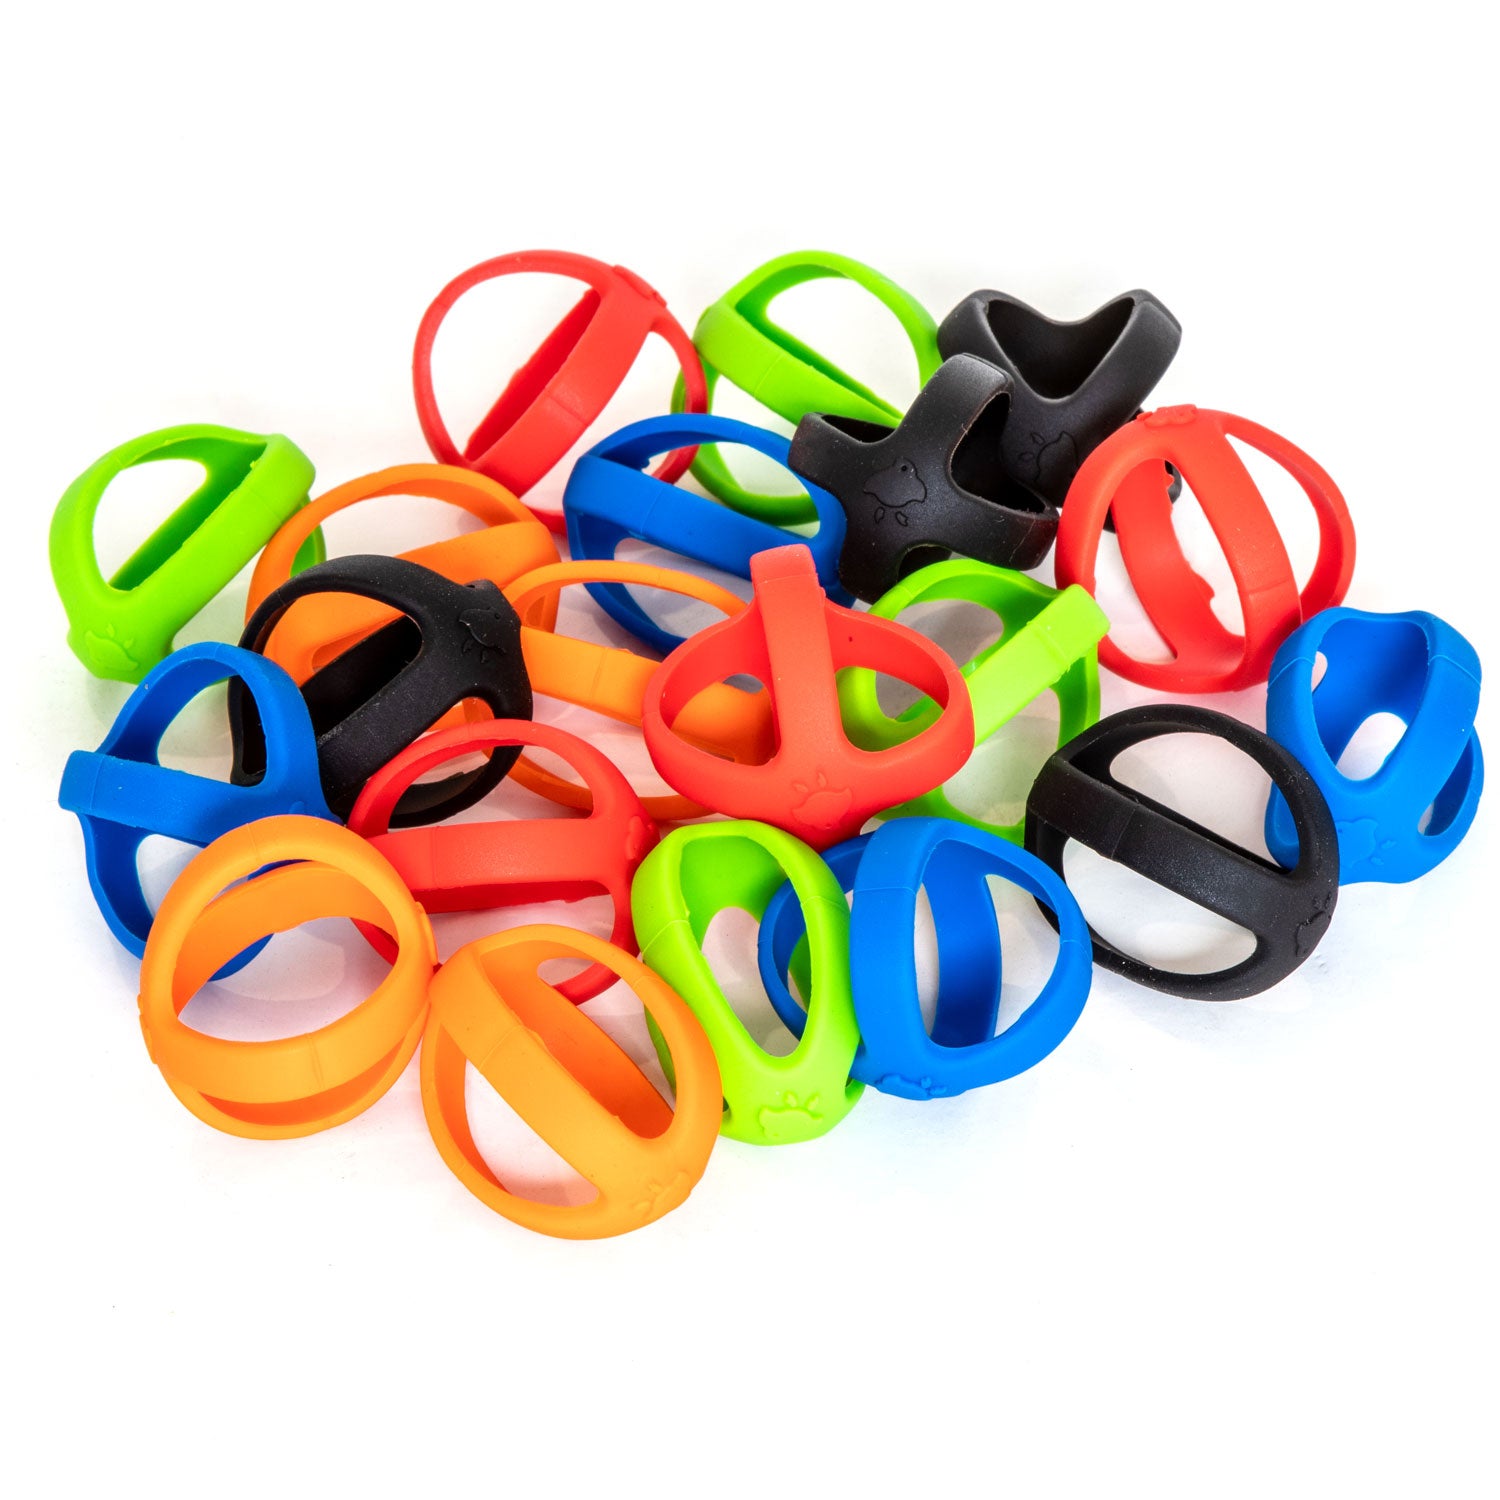  Grifiti Band Joes Grip Rubber Bands 5 x 2 Inch 5 Pack Long  Lasting Assorted Colorful Silicone Grip Cooking Grade Heat Cold UV Chemical  Resistant Tumblers Thermo Travel Water Bottles